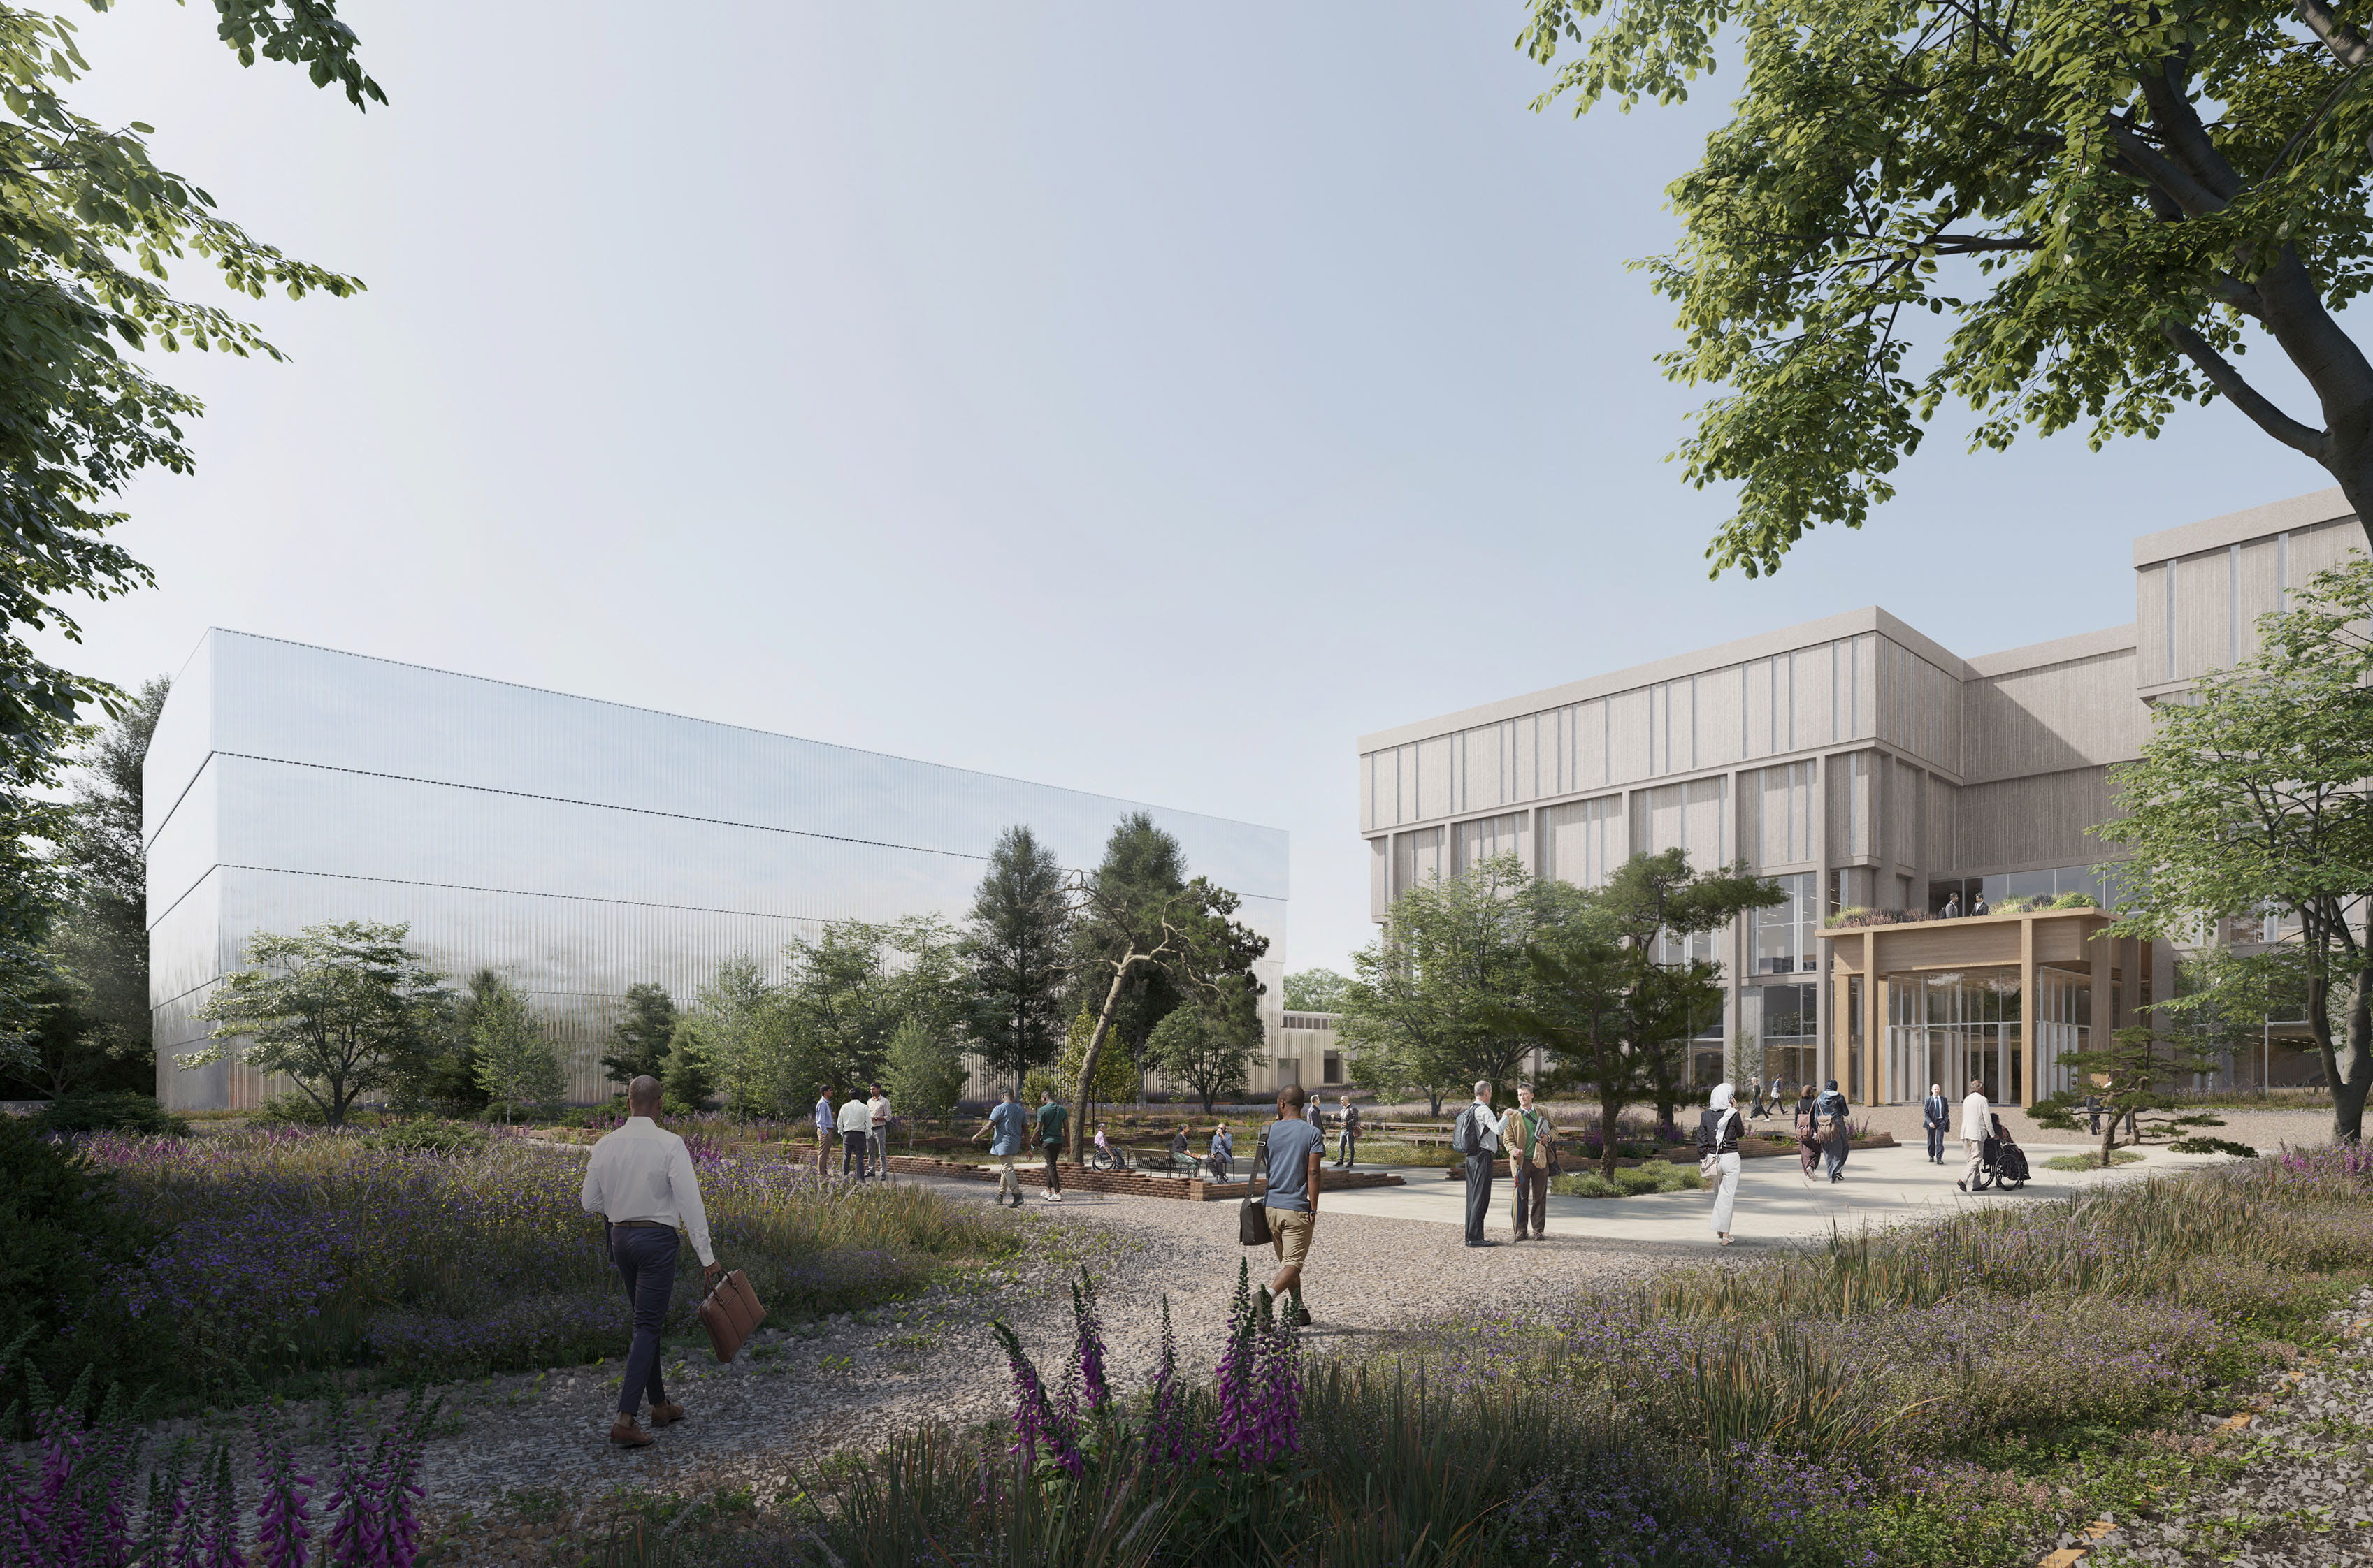 Planning achieved for sustainable redevelopment of British library’s Boston spa site